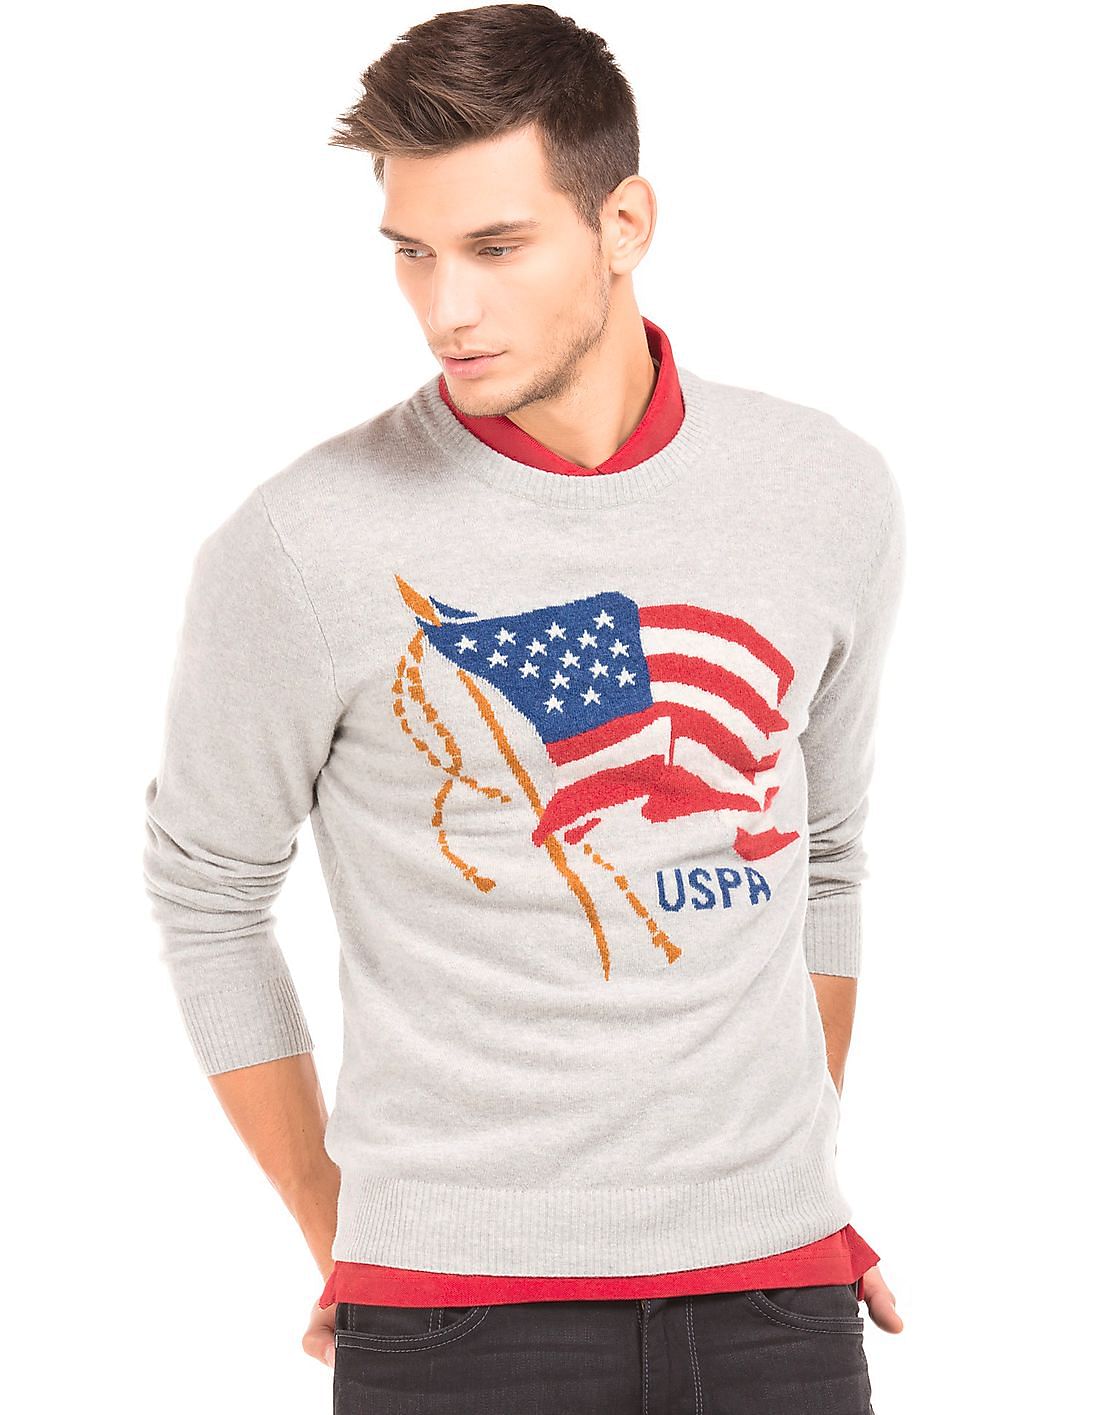 Buy U.S. Polo Assn. Denim Co. Men Patterned Muscle Fit Sweater - NNNOW.com